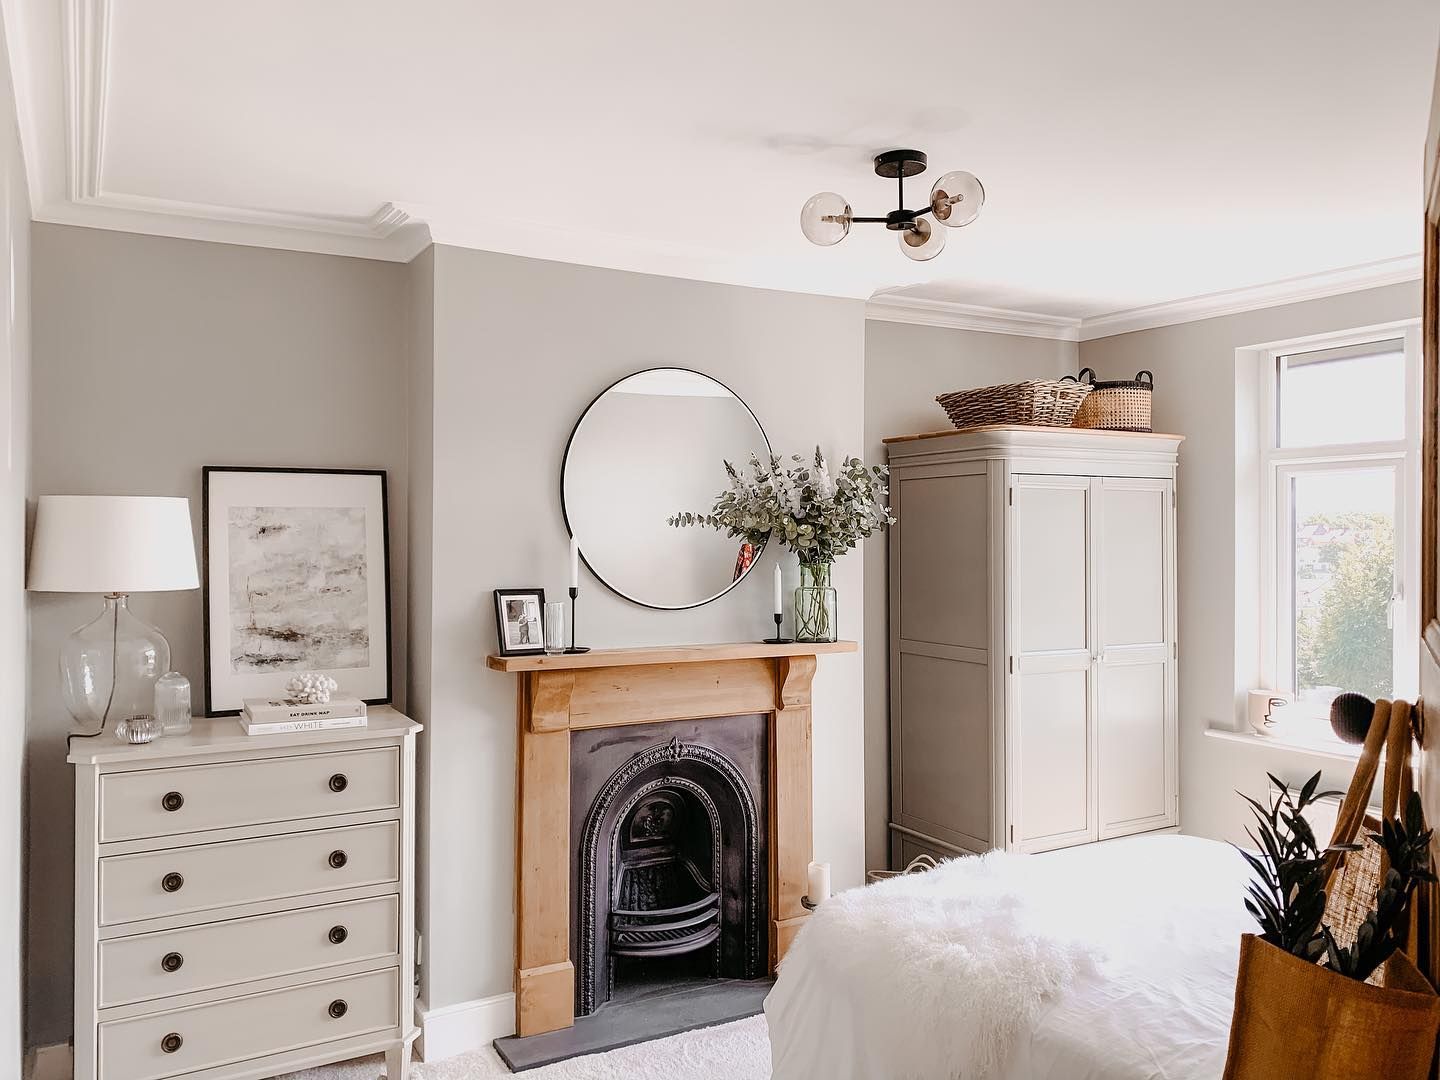 Best Wardrobes For Small Bedrooms | Oak Furnitureland Blog Inside Double Wardrobes With Drawers And Shelves (View 5 of 15)